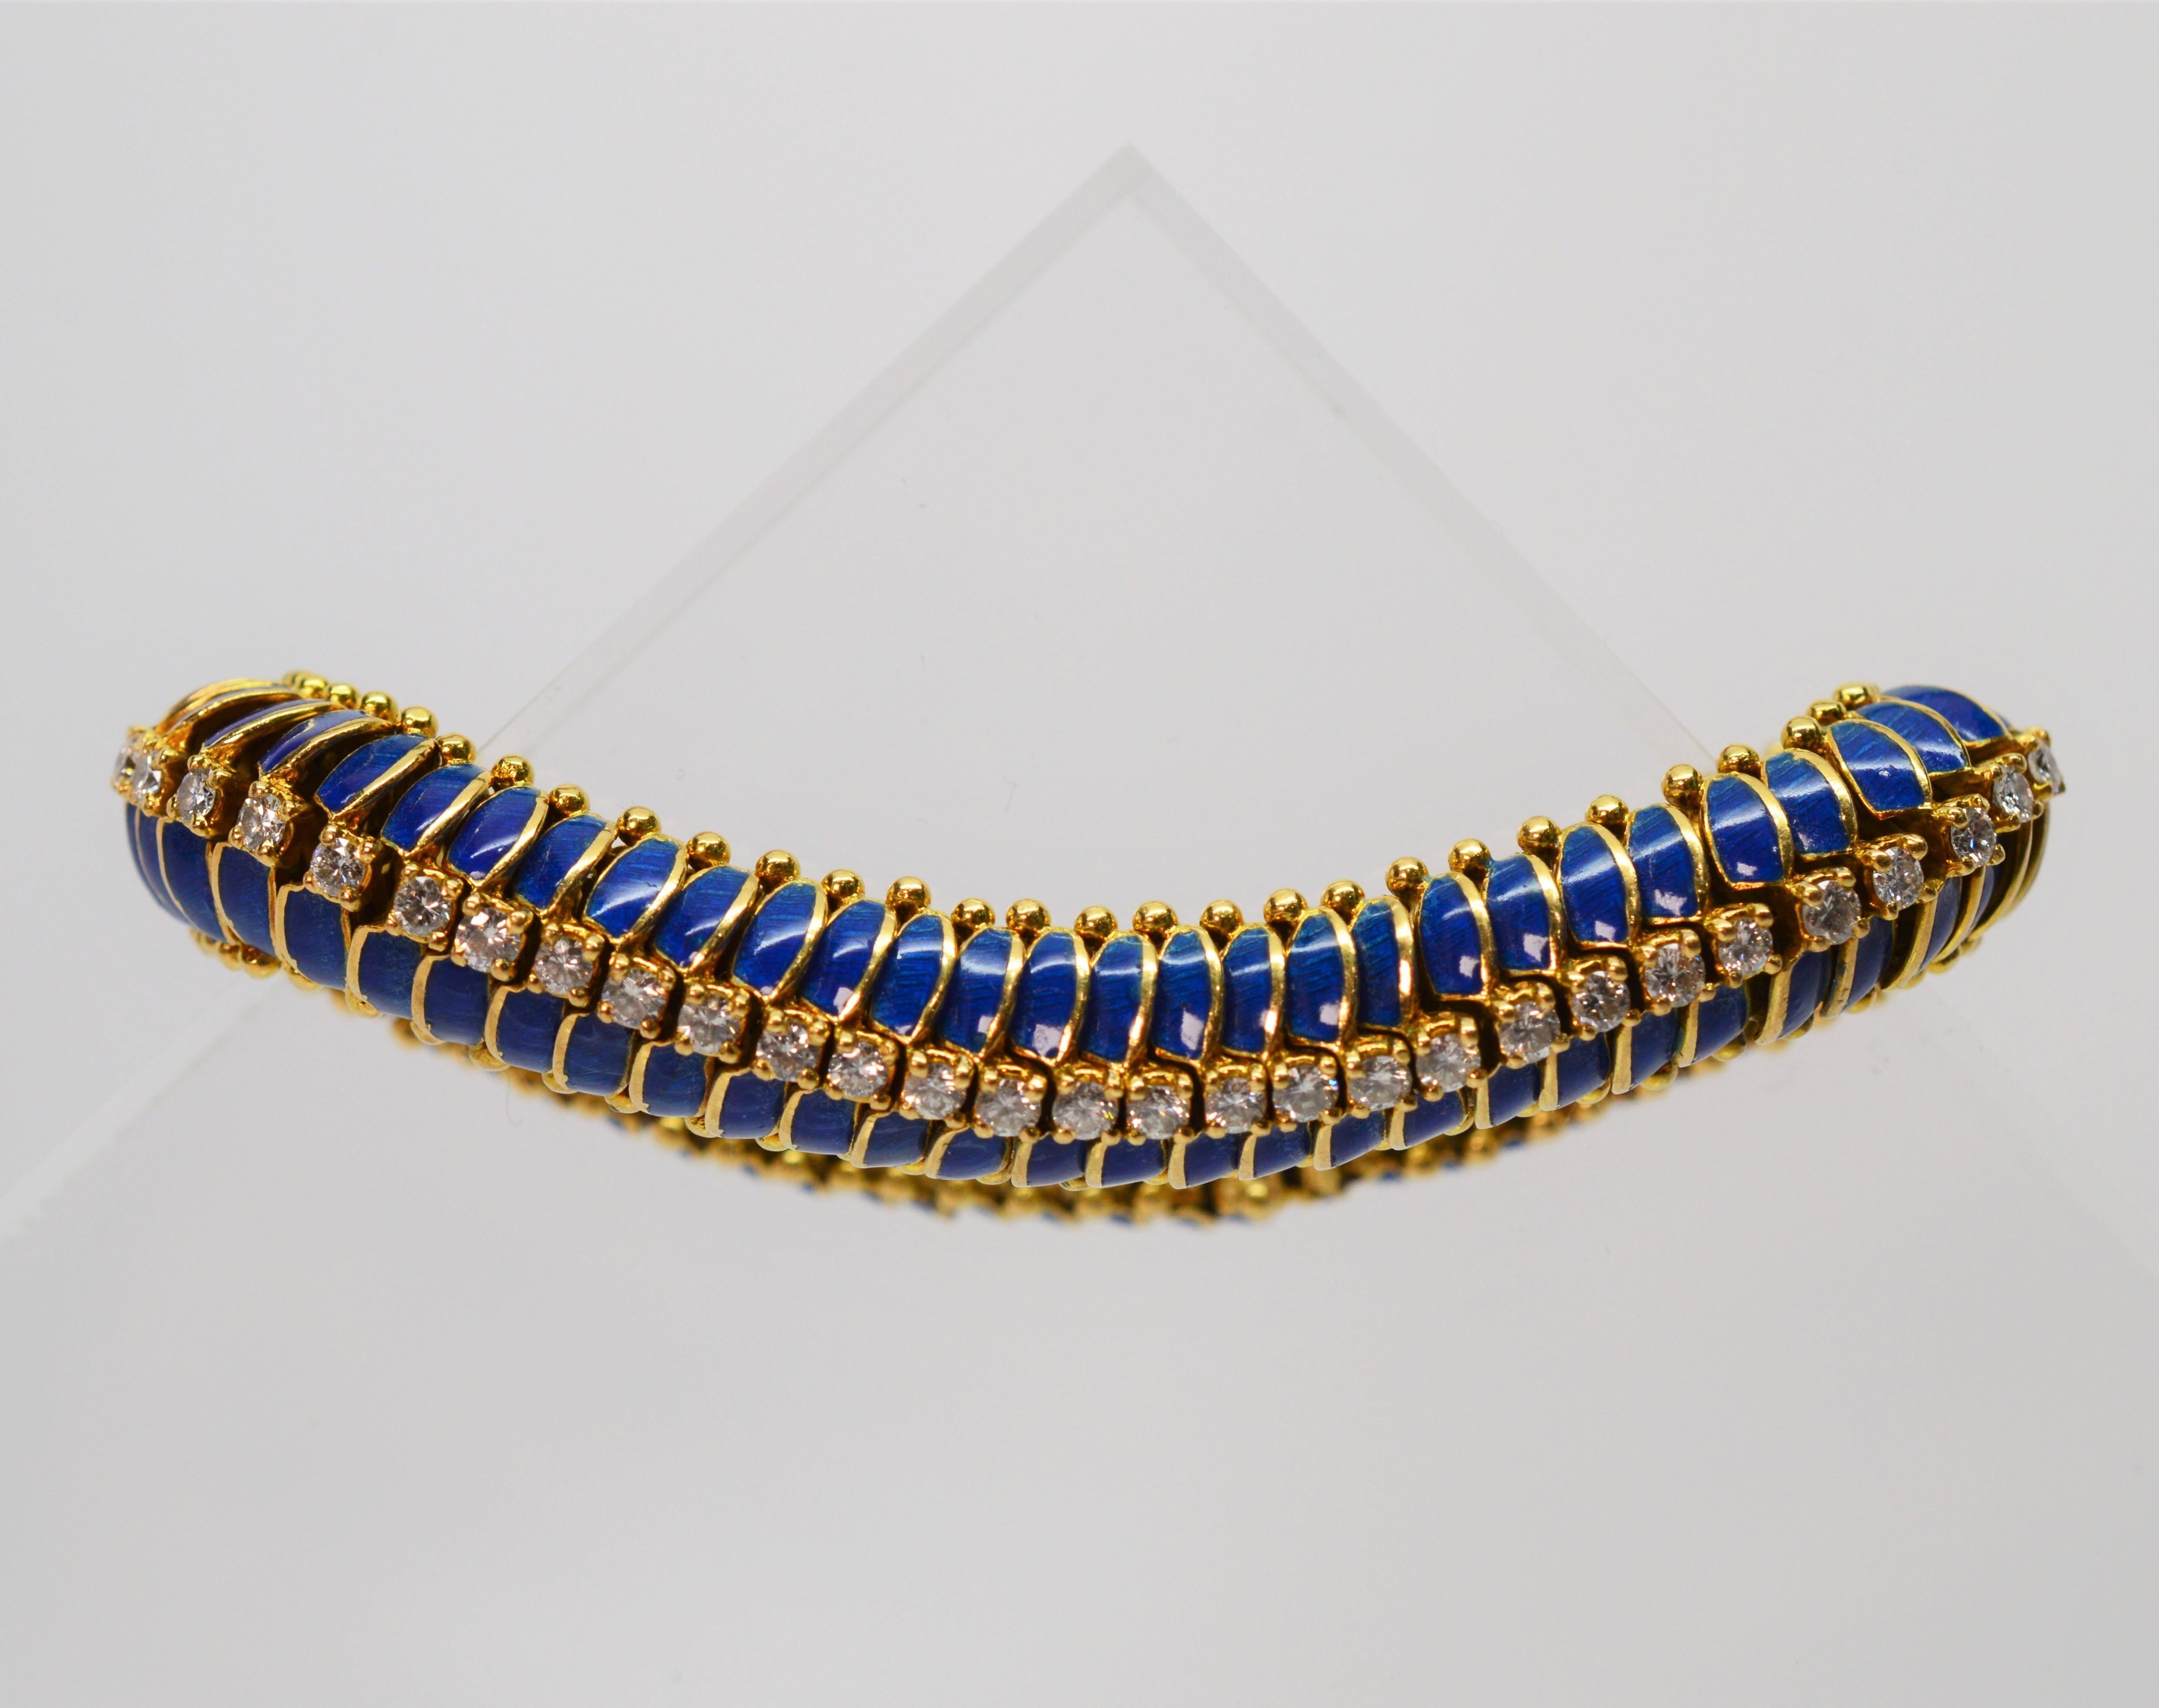 Tiffany & Co. Diamond Blue Enamel Yellow Gold Bracelet In Excellent Condition For Sale In Mount Kisco, NY